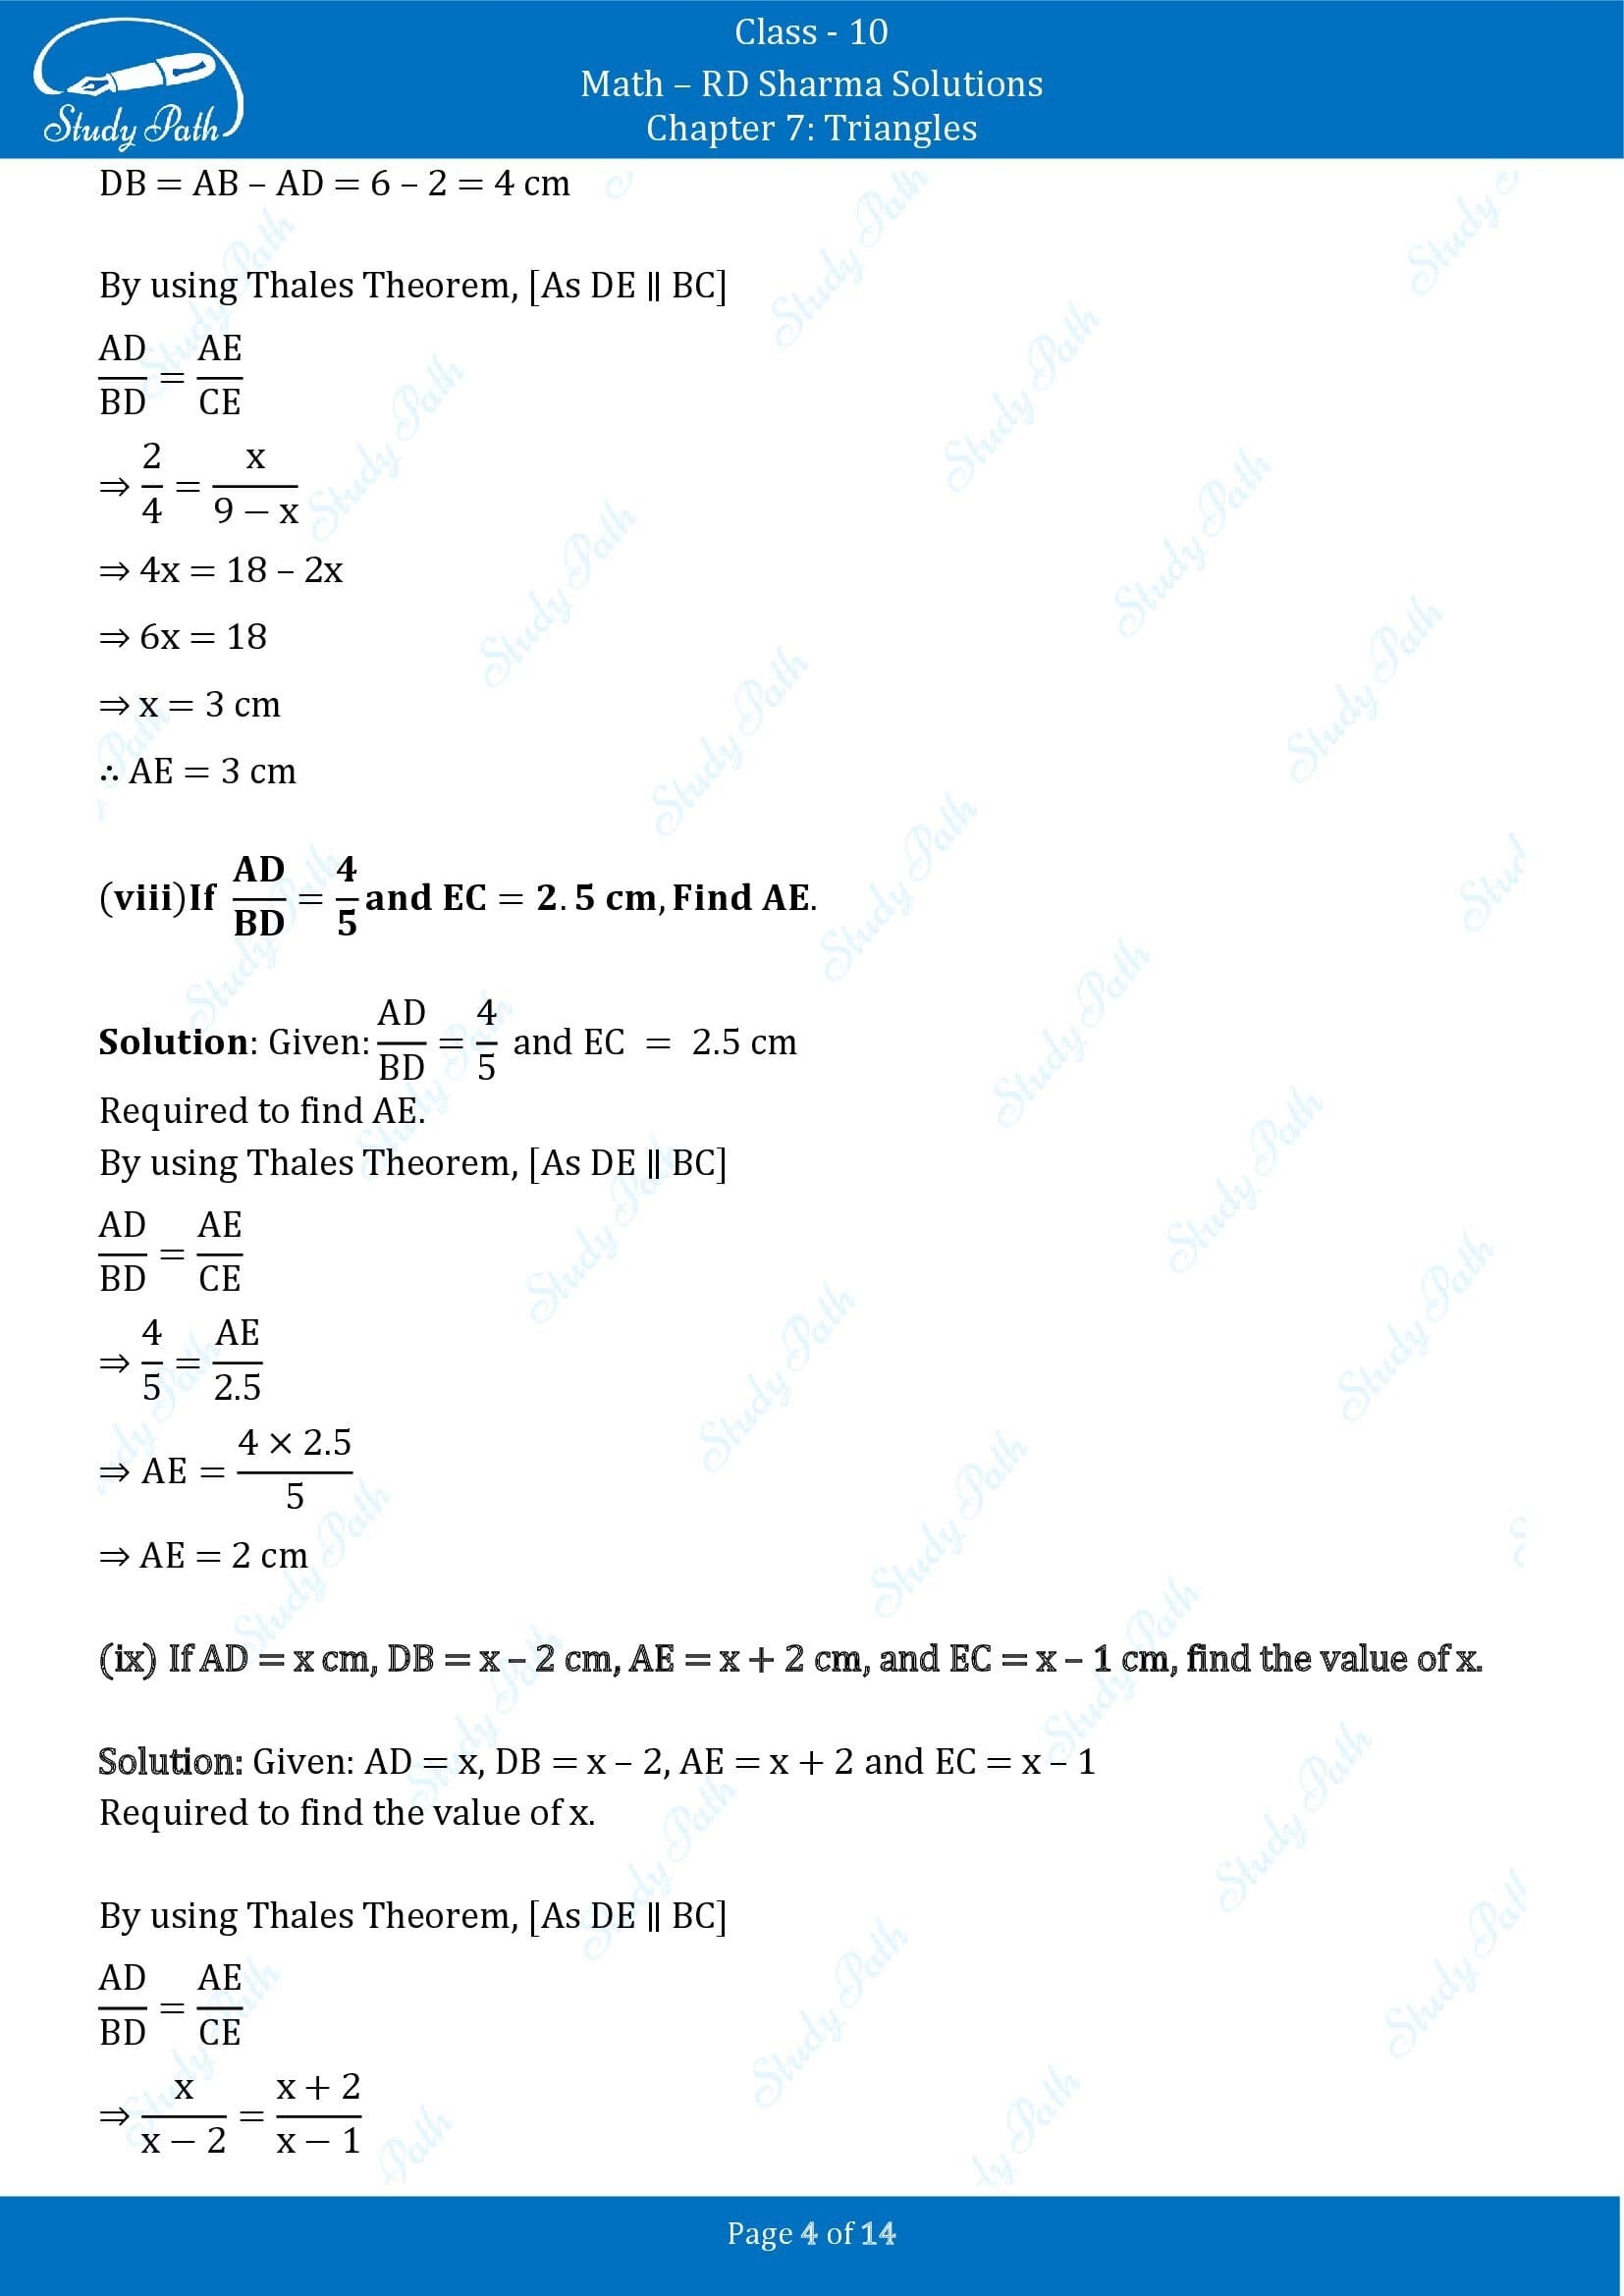 RD Sharma Solutions Class 10 Chapter 7 Triangles Exercise 7.2 00004